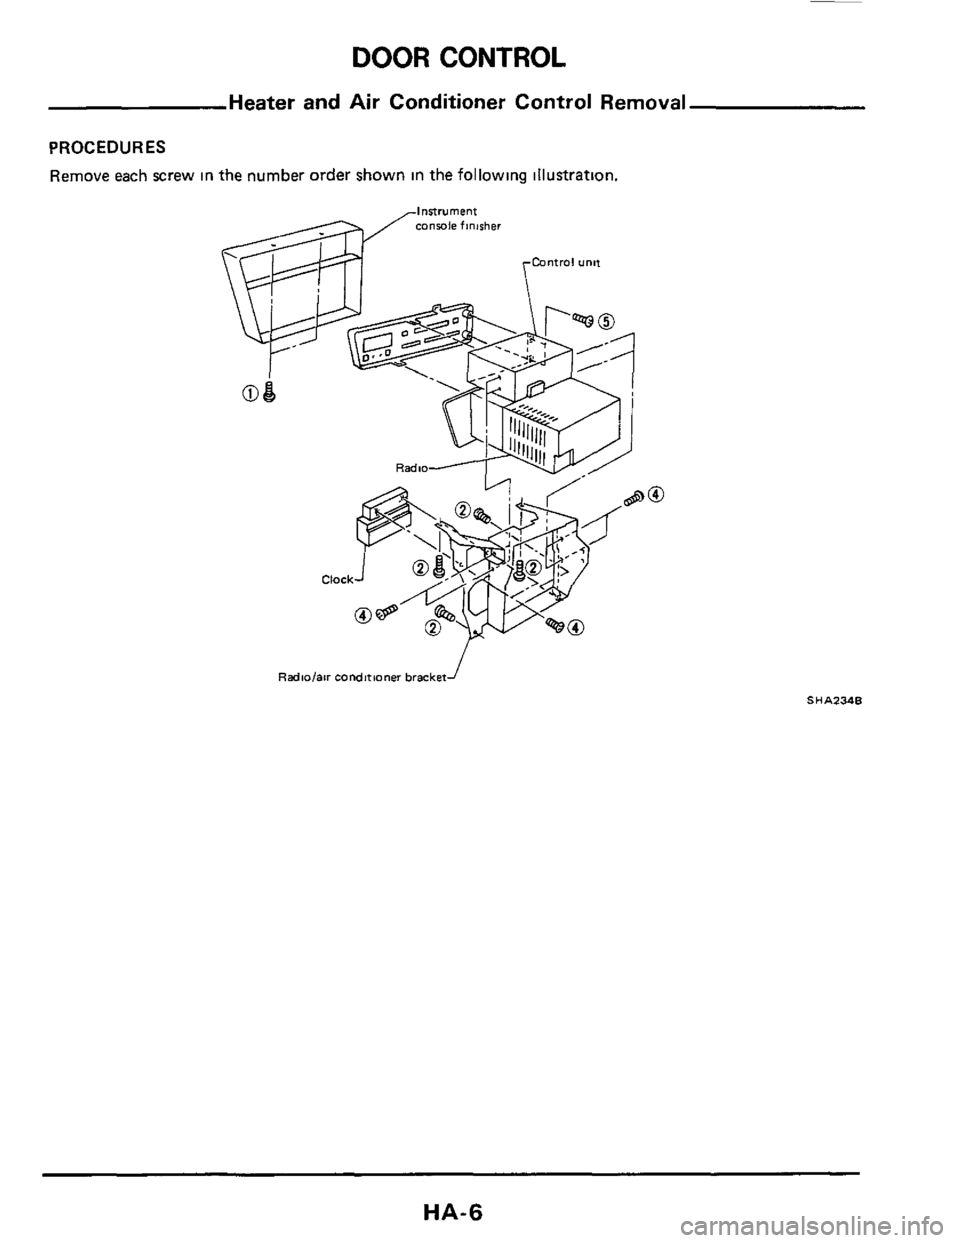 NISSAN 300ZX 1984 Z31 Heather And Air Conditioner Workshop Manual DOOR CONTROL 
Heater  and Air Conditioner  Control Removal 
PROCEDURES 
Remove each screw  in the number  order shown in  the following  illustration. 
Radiolaw condnmner bracket f 
SHA234B 
HA-6  